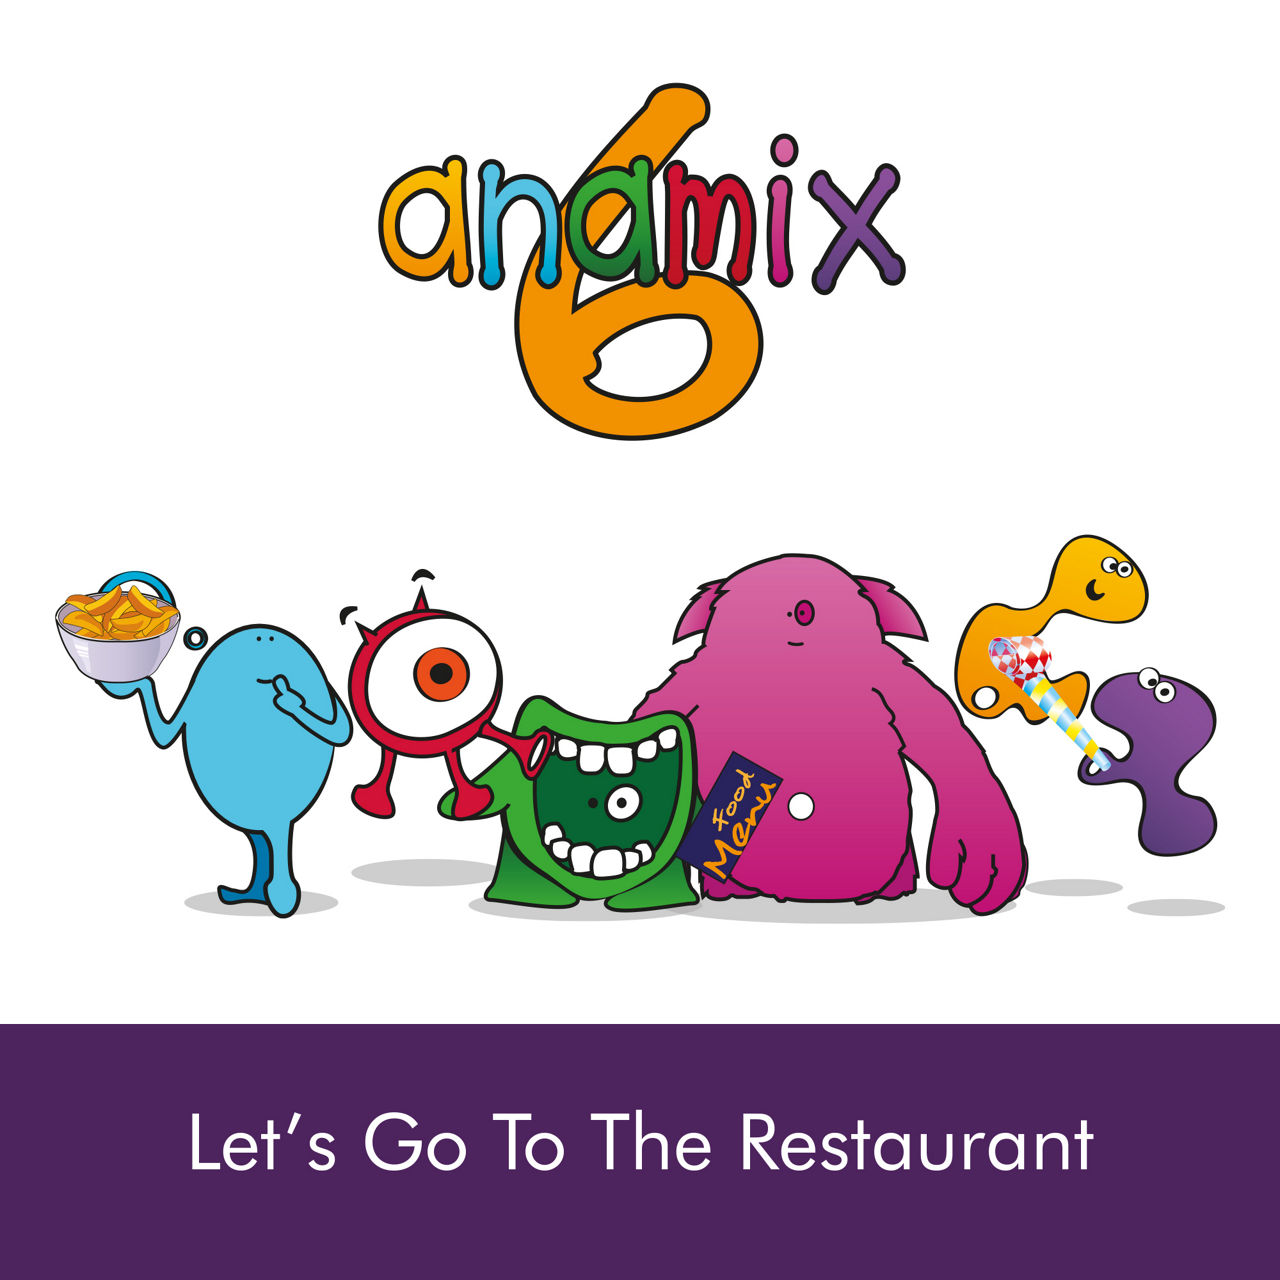 Anamix 6 let's go to the restaurant